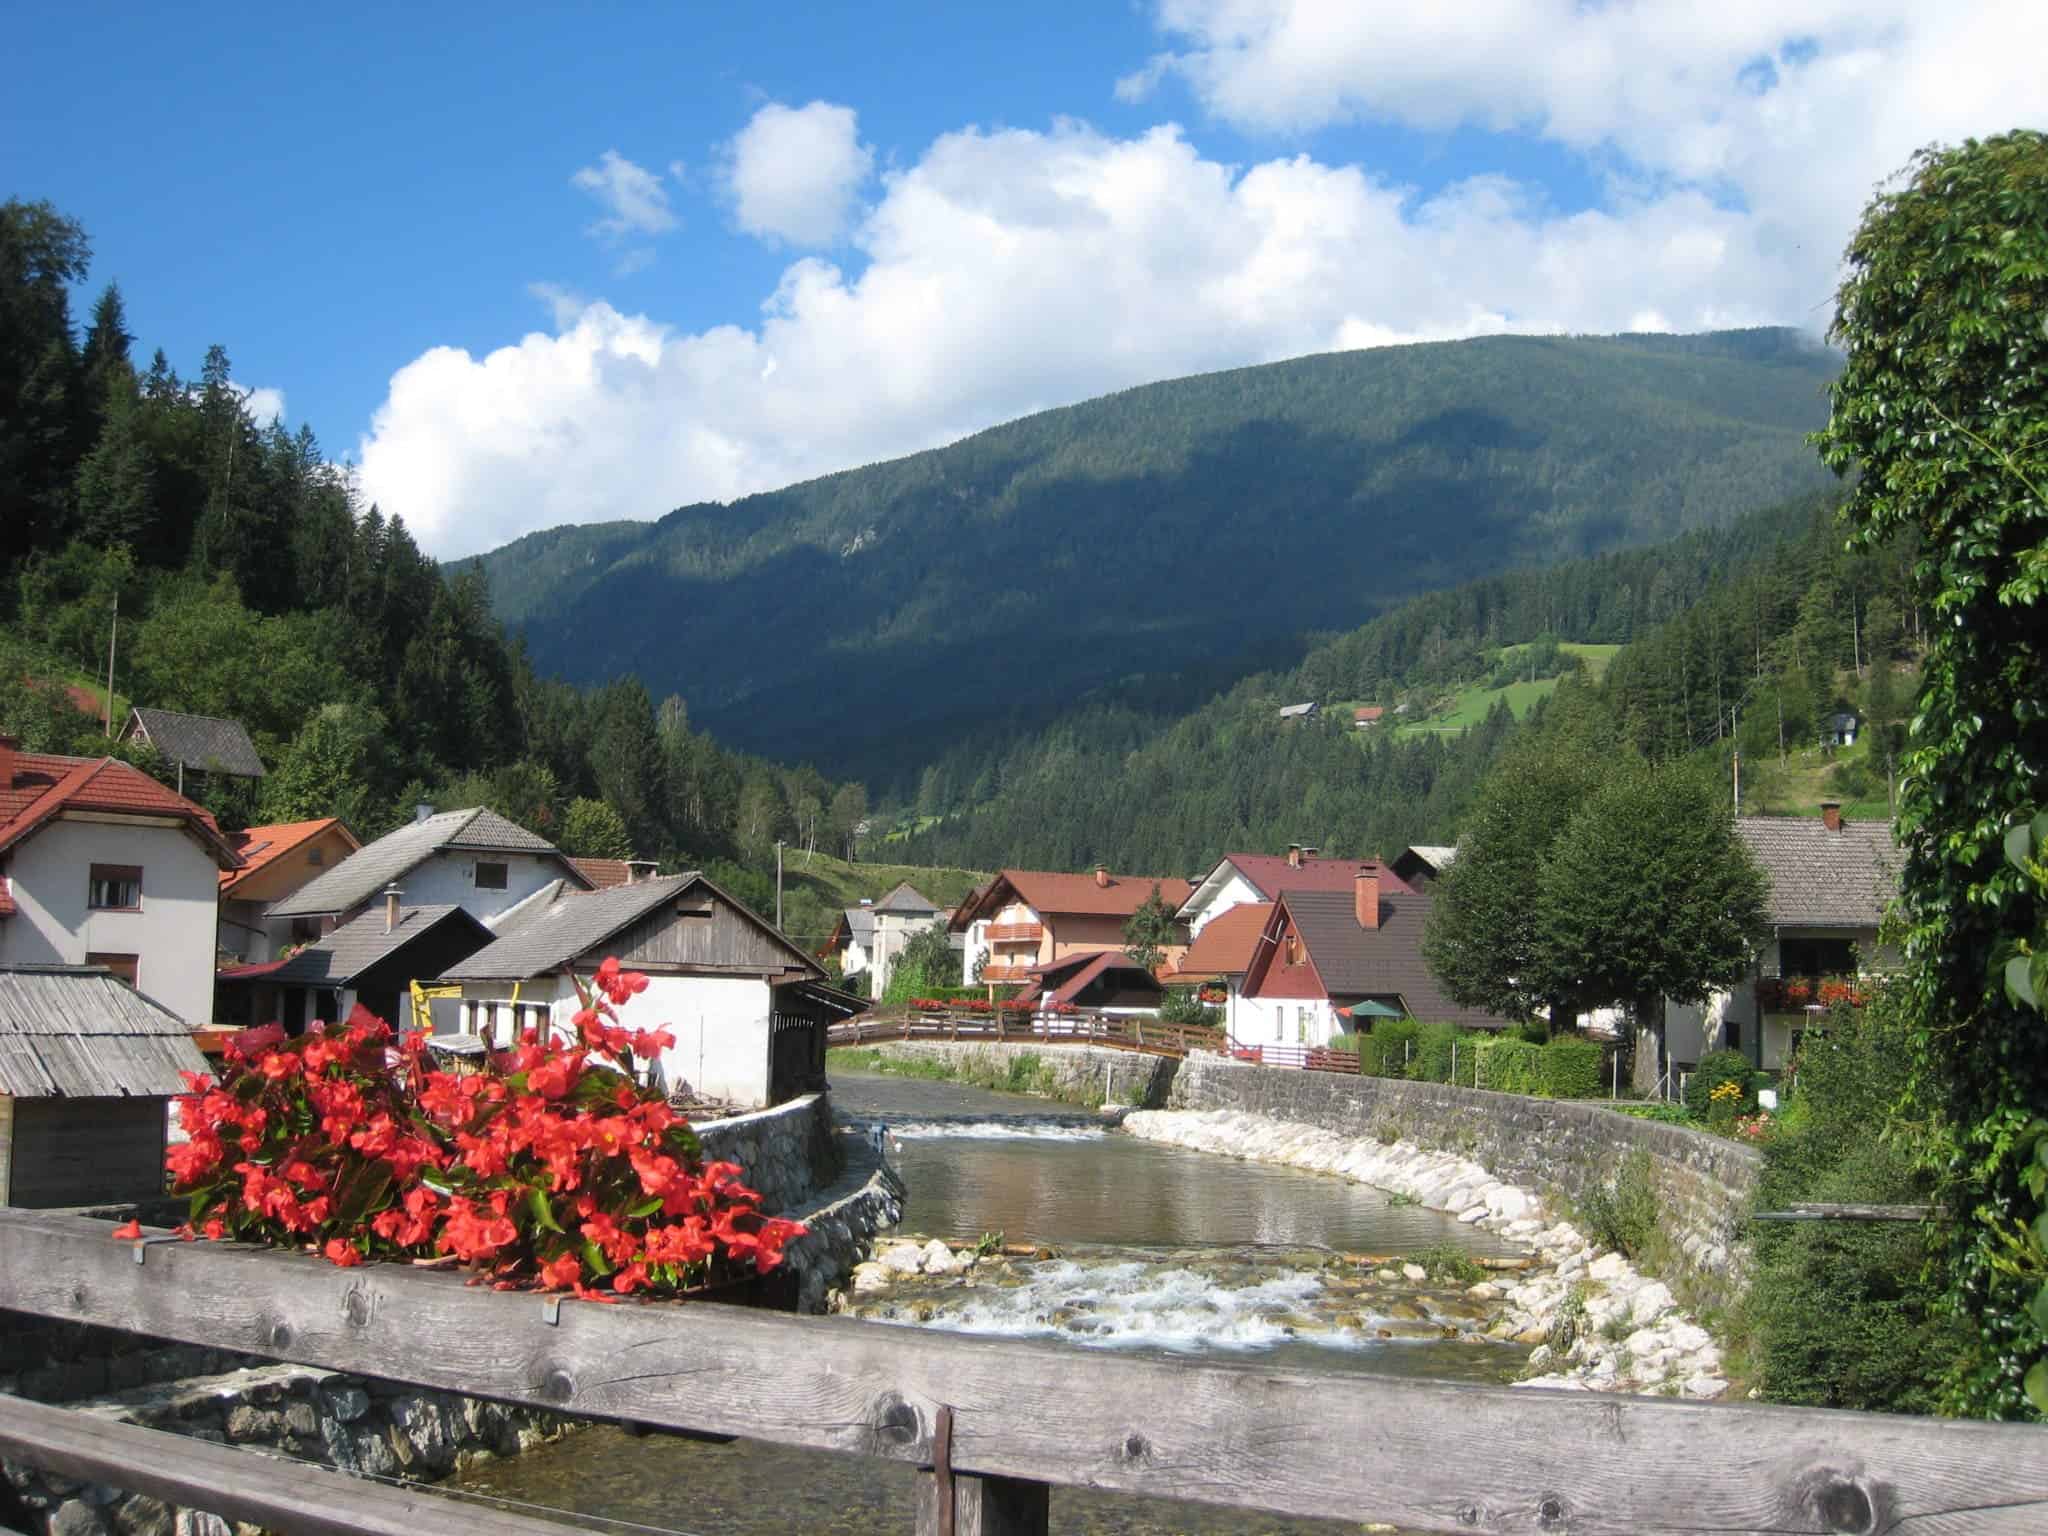 Slovenia: The Luče Village and Savinja River in the north-eastern mountains of the country.